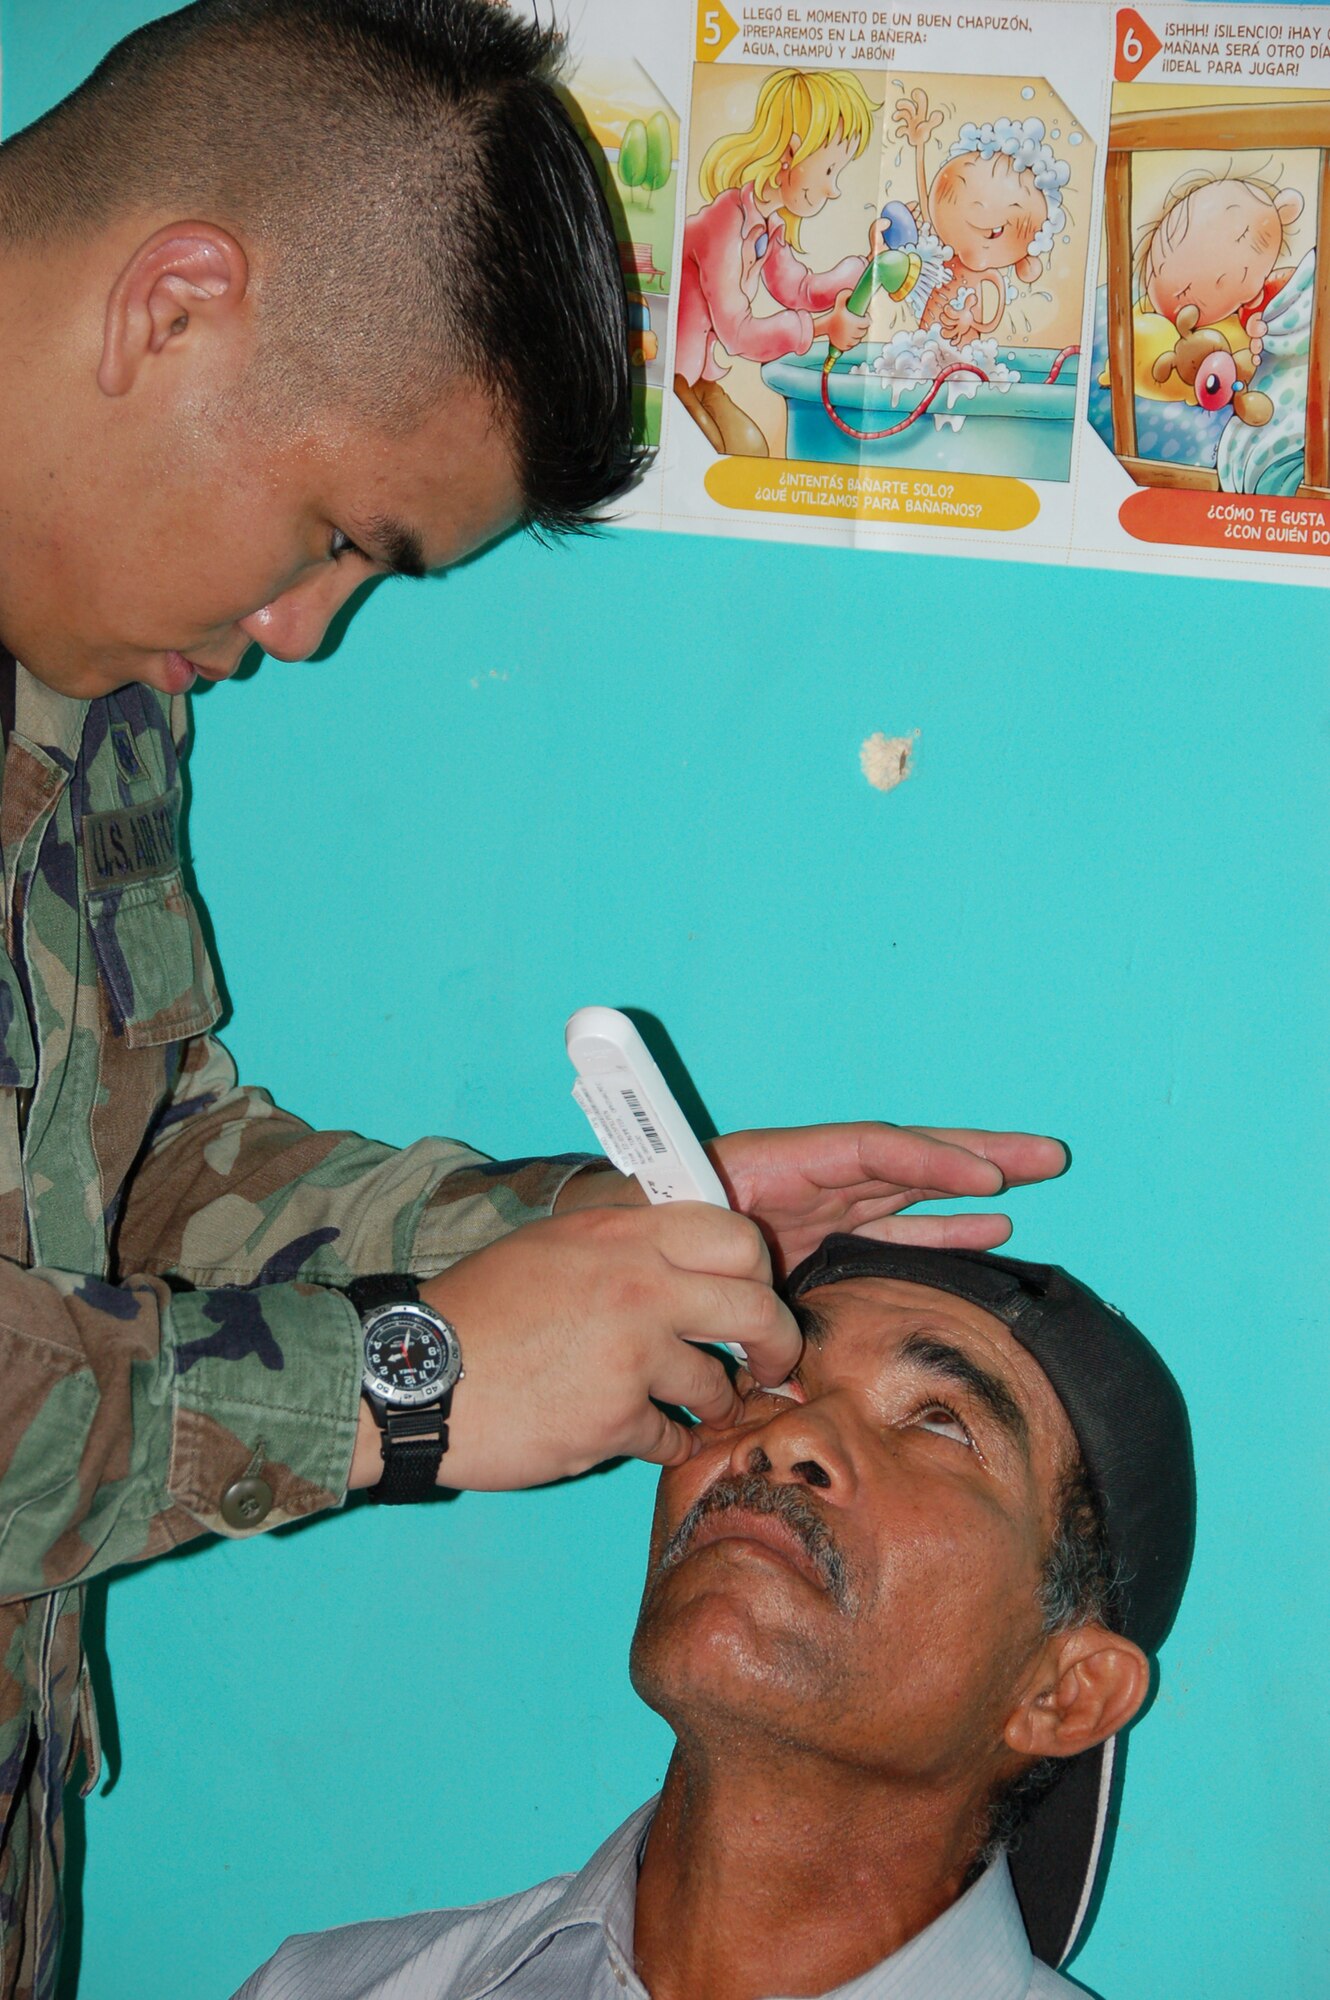 Sr. Amn. Dexter J. Raflores, a technician from the 42nd Medical Group at Maxwell Air Force Base, Ala., deployed to Medical Readiness Training Exercise (MEDRETE) Panama tests the pressure in a patient?s eye to screen for glaucoma at the Escuela de Cabuya school in Cabuya, Panama 14 July. The MEDRETE is a two-week long U.S. Southern Command sponsored exercise designed to hone the skills of medical personnel while providing free health care in remote locations through partnership with host nation doctors. Approximately 535 patients were seen by the medical staff at the Cabuya location 14 July. (Photo by Capt. Ben Sakrisson, Air University Public Affairs)